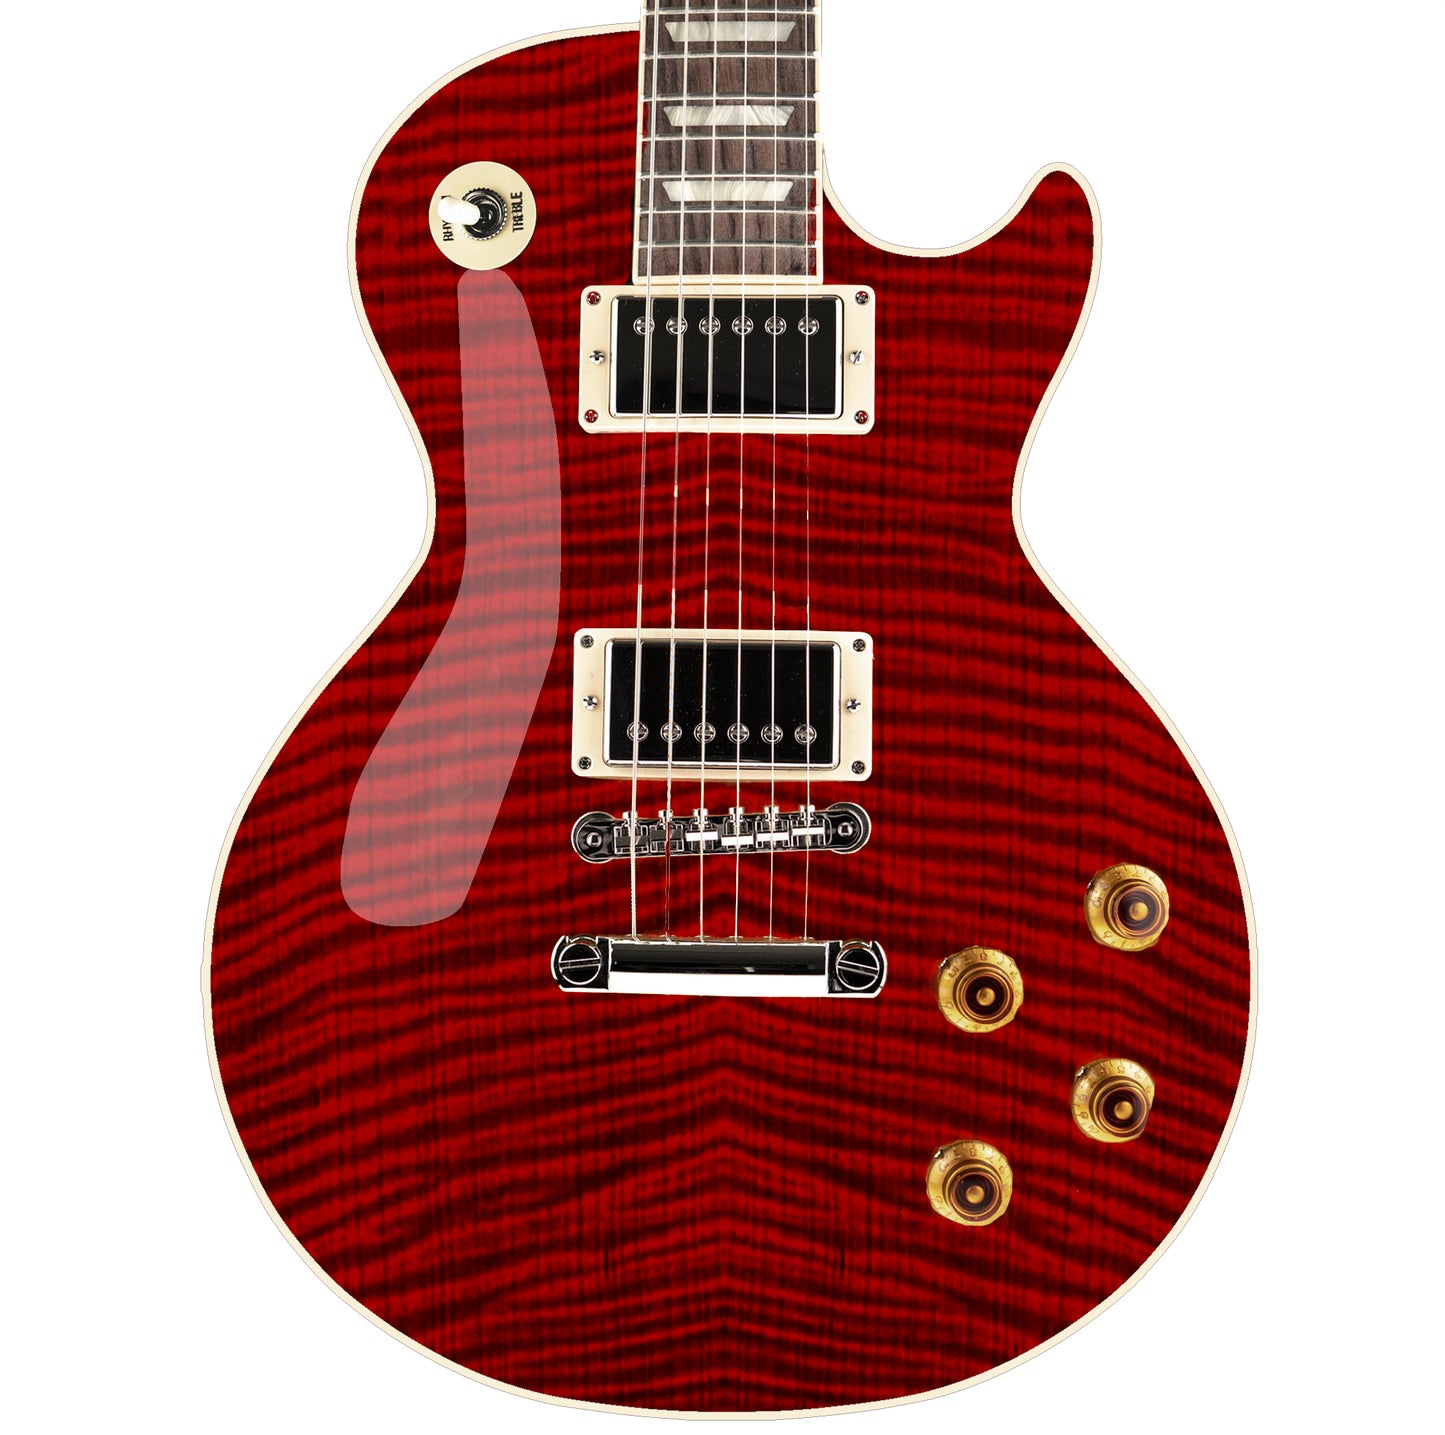 Guitar Skin Wrap Laminated Vinyl Decal Sticker The Blood Red Flamed Maple GS43